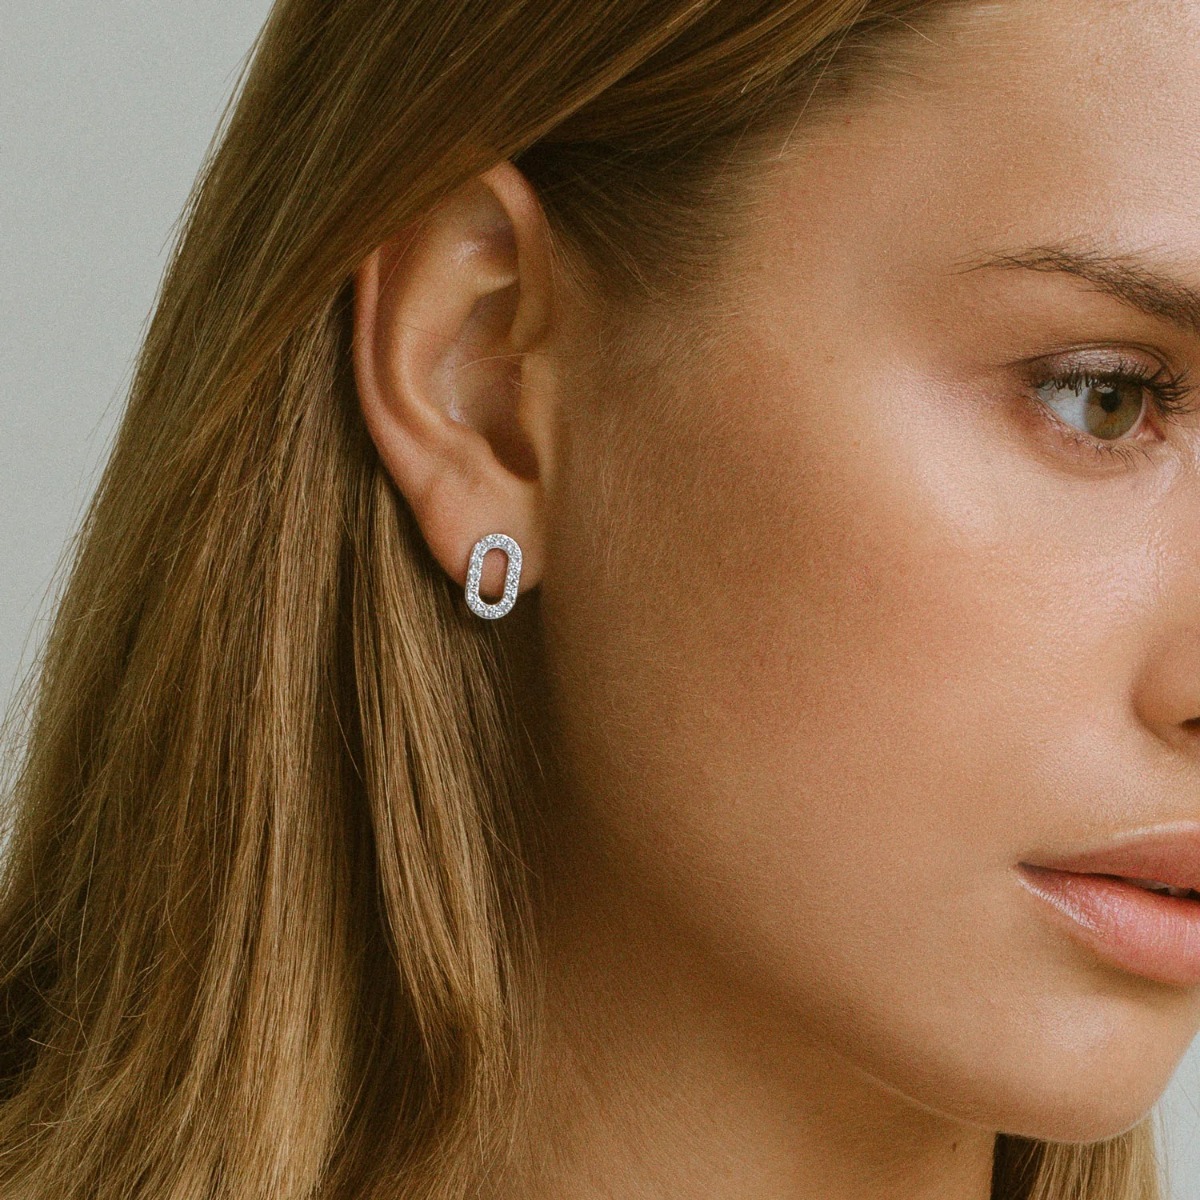 Sif Jakobs Capizza Silver Earrings with White Zirconia